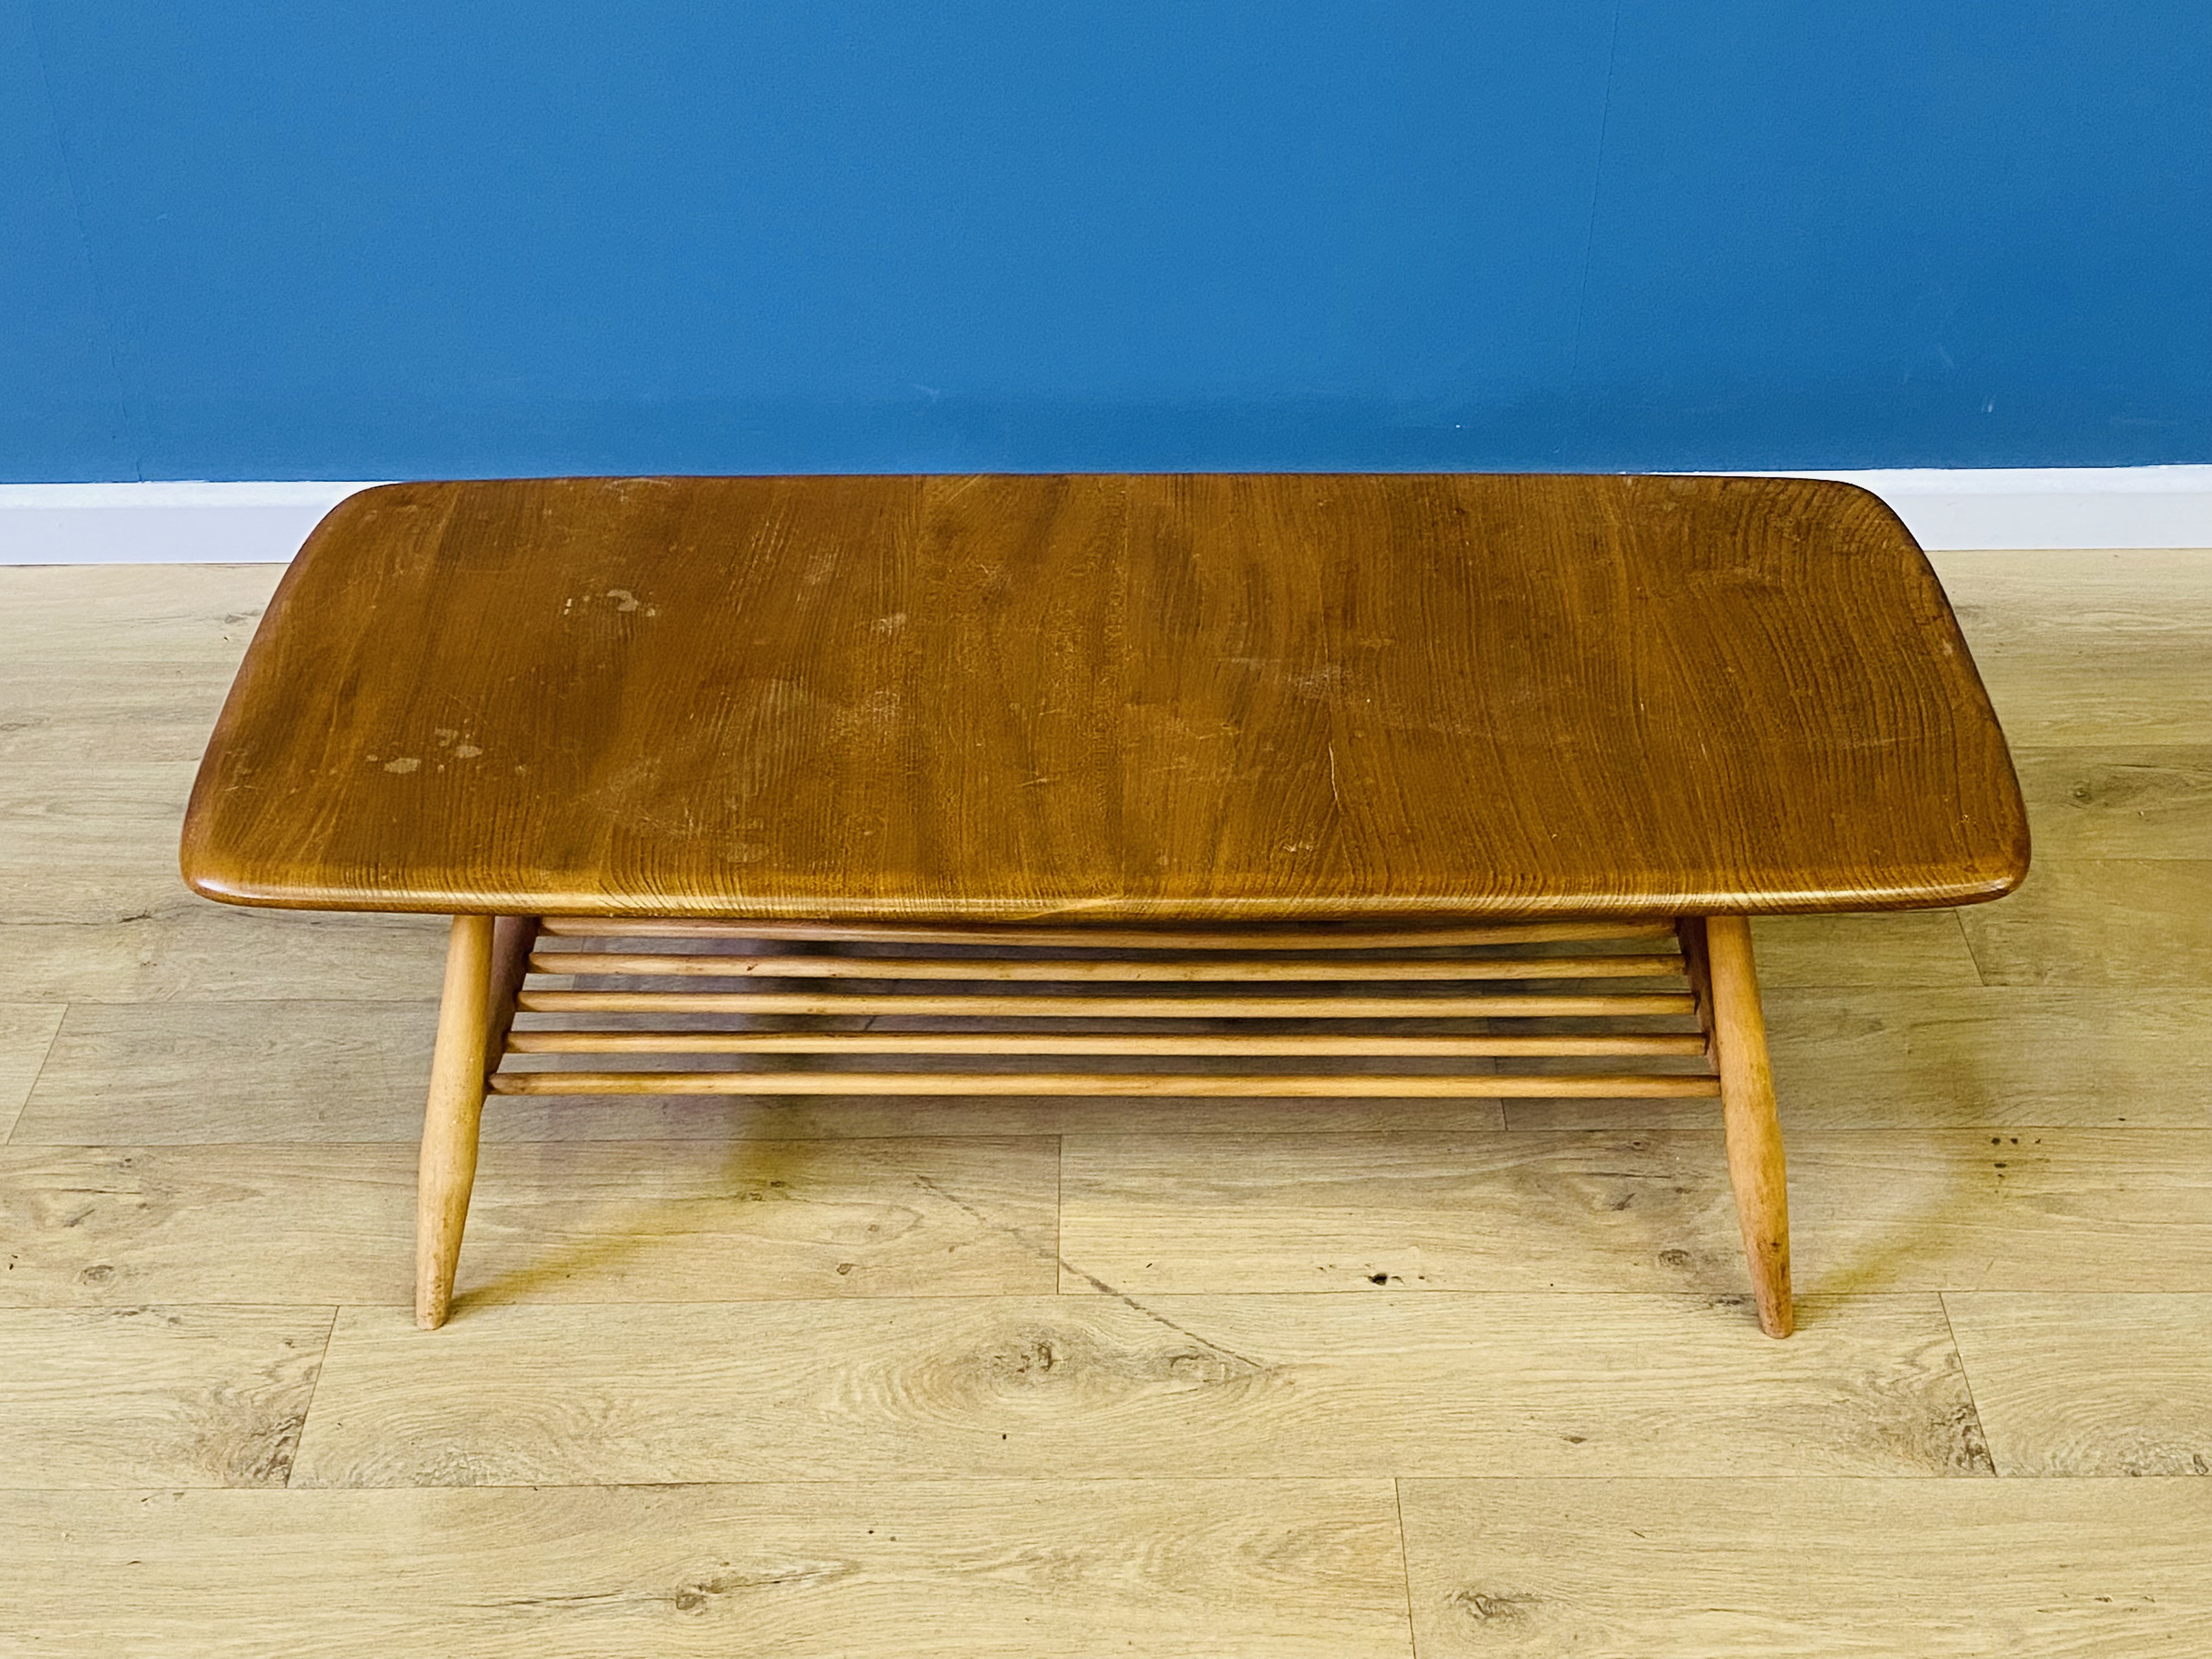 Ercol coffee table - Image 3 of 4